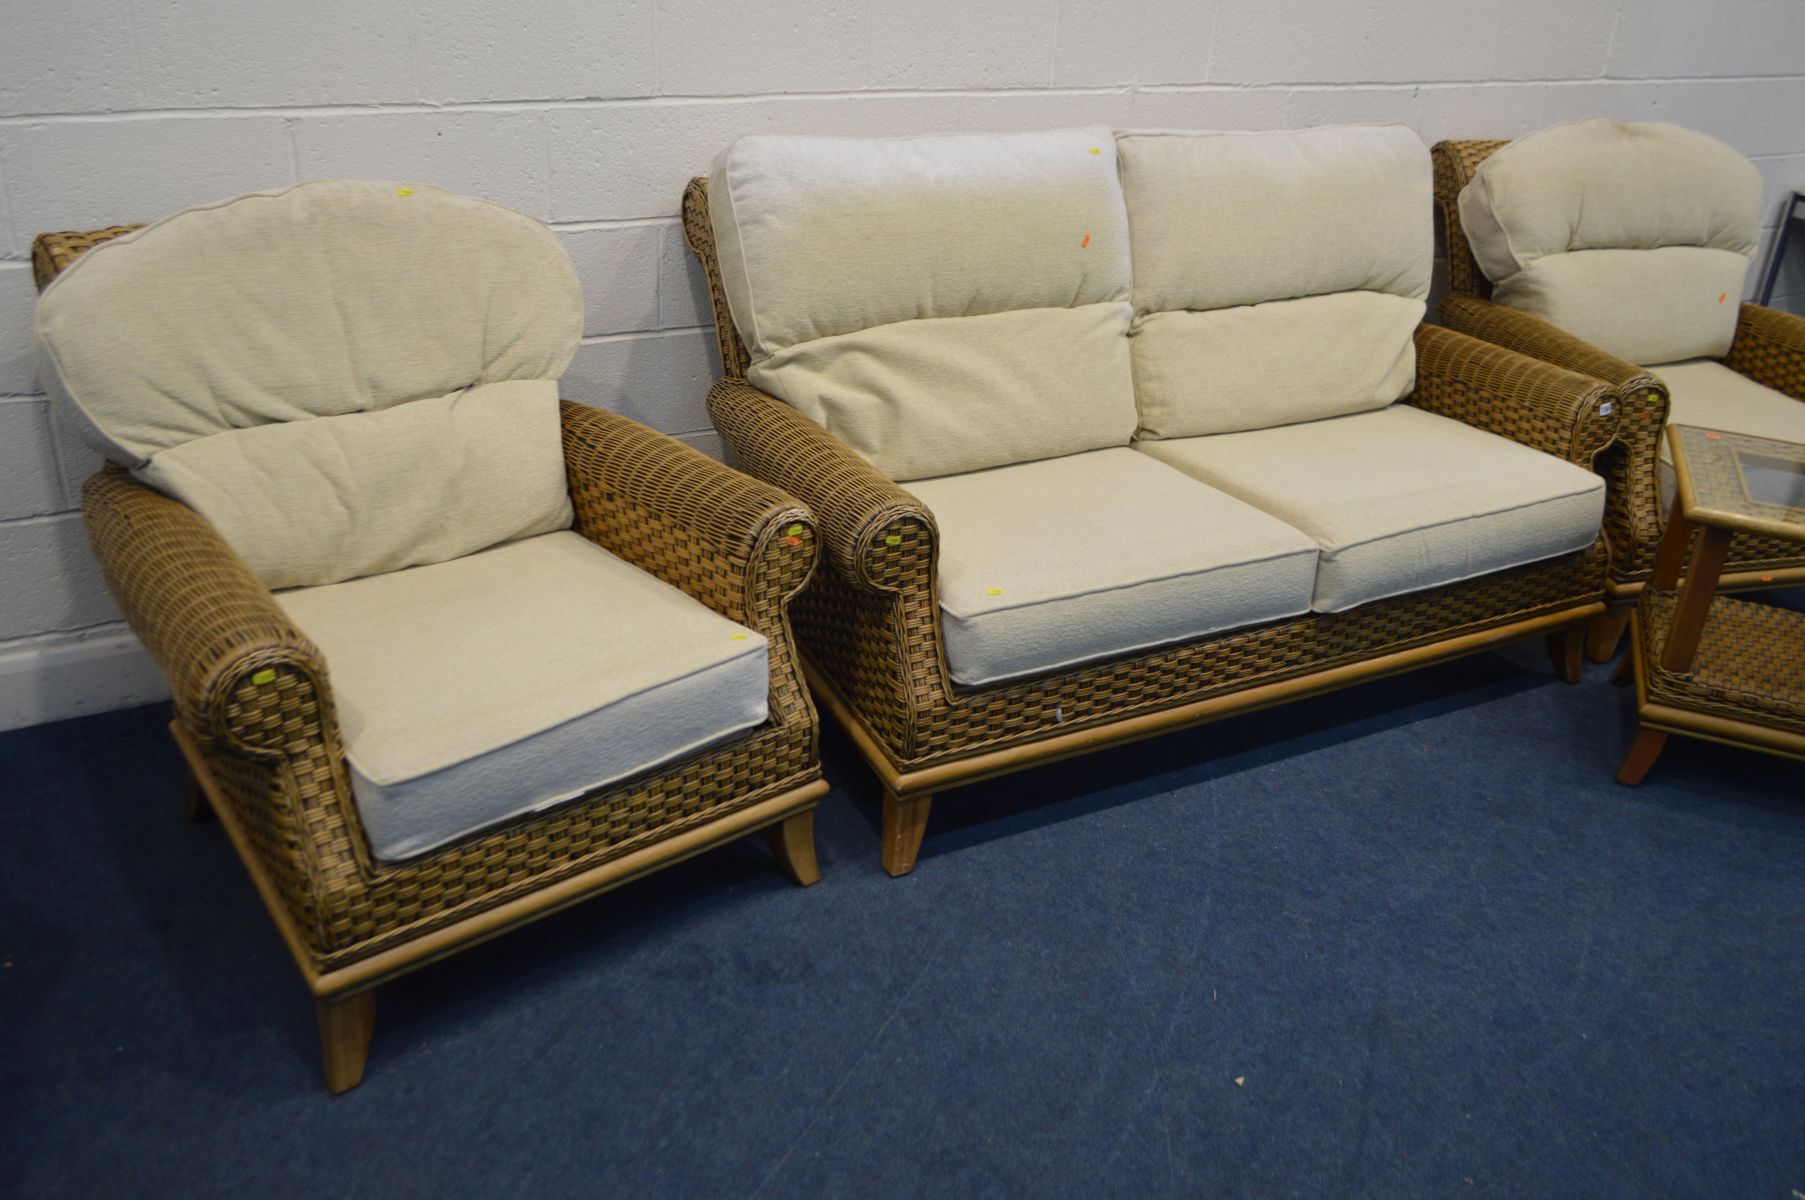 A FOUR PIECE CONSERVATORY SUITE, cream cushions, comprising a two seat settee, two armchairs and - Image 2 of 4